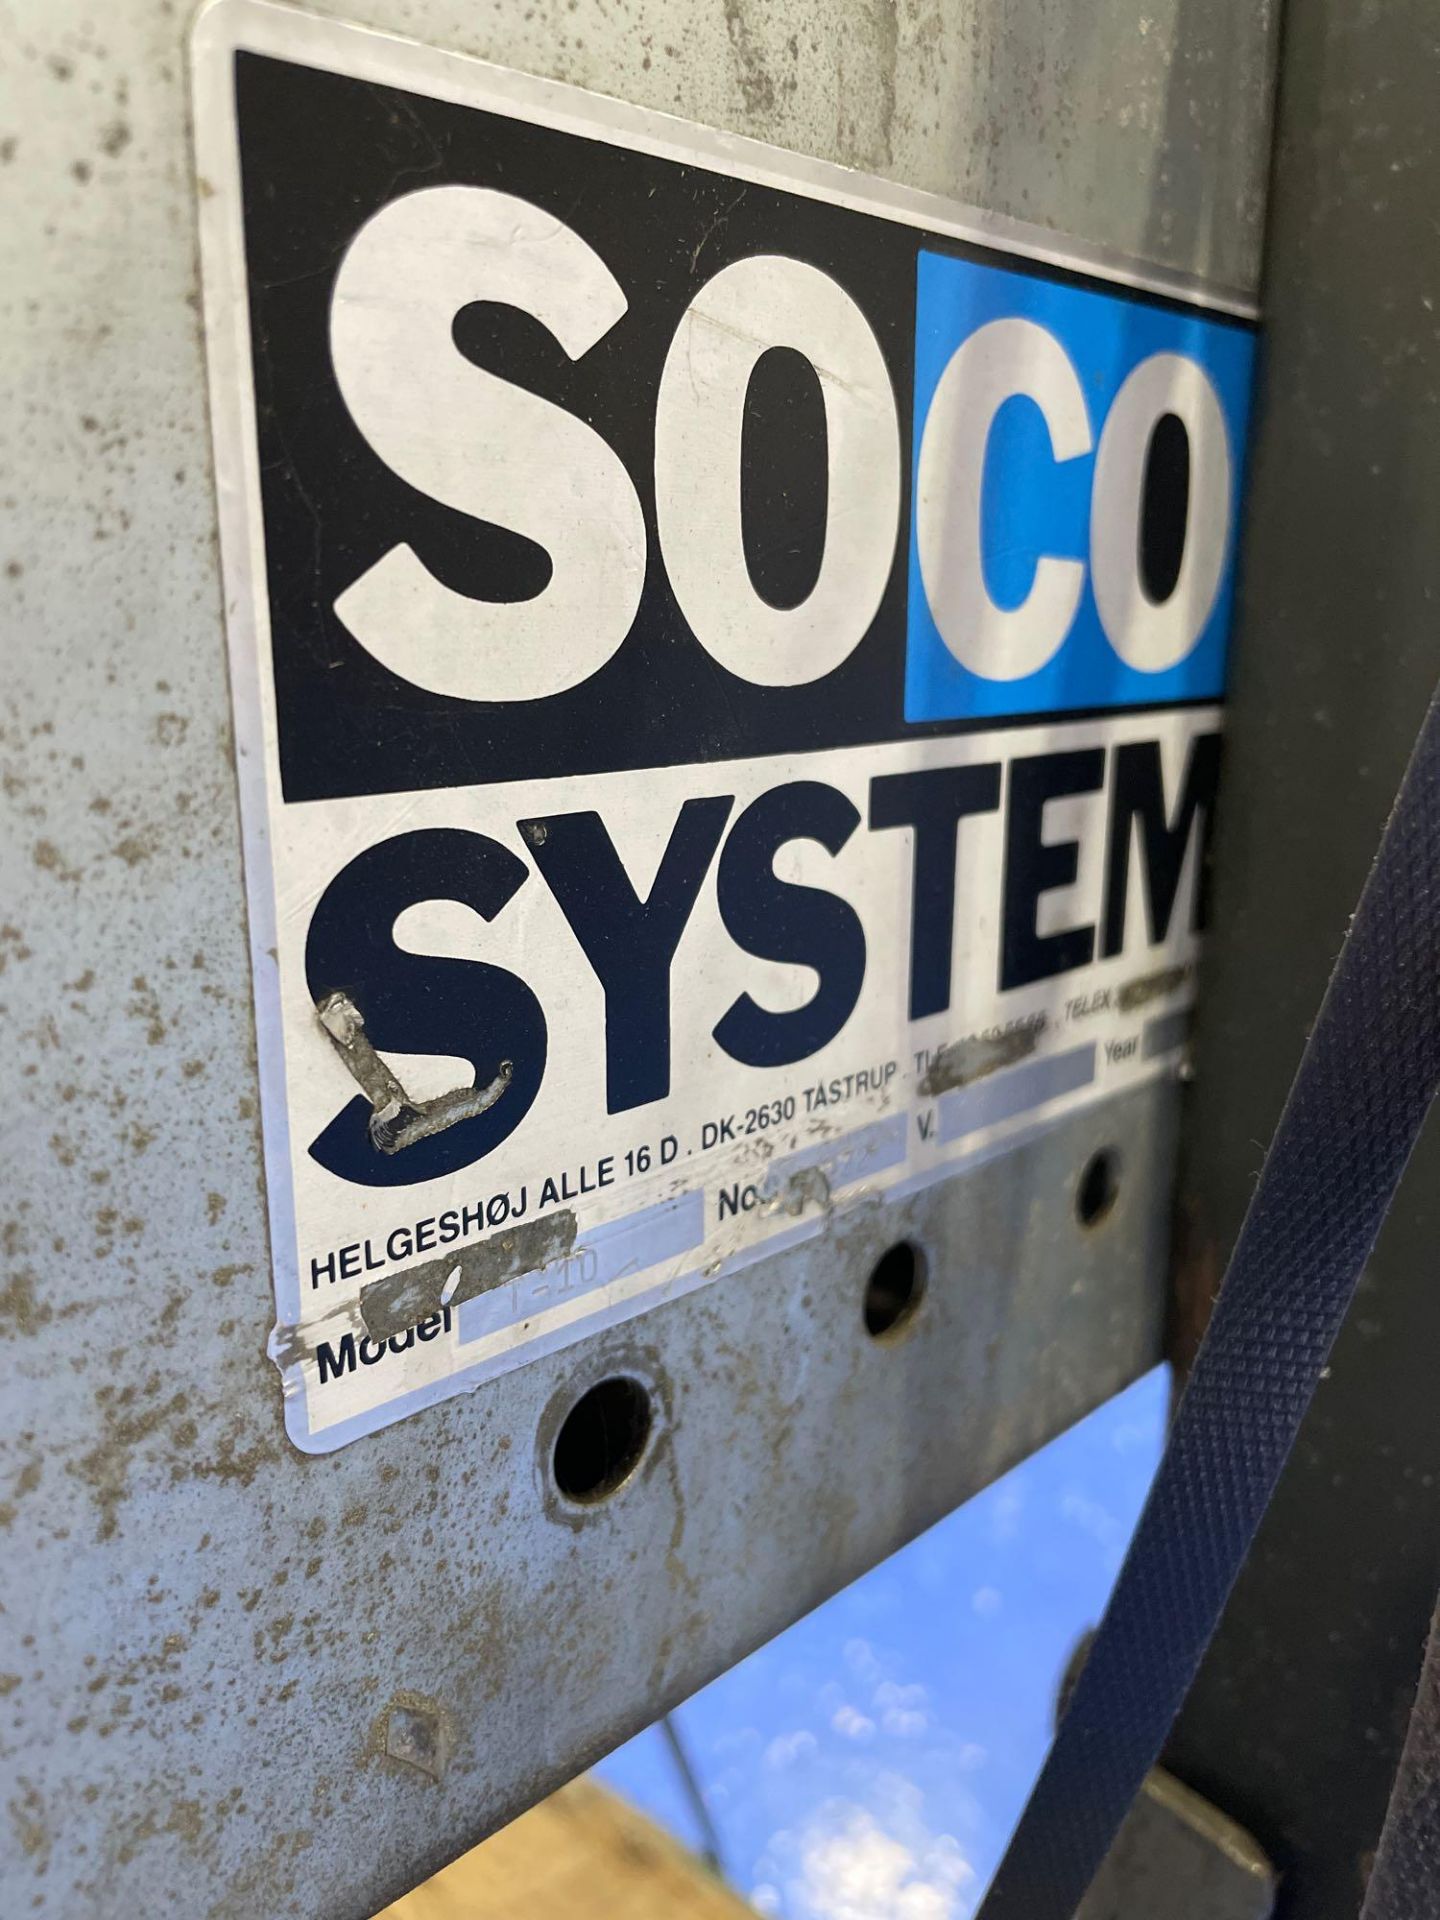 Soco System T-10 Case Taper - Image 5 of 5